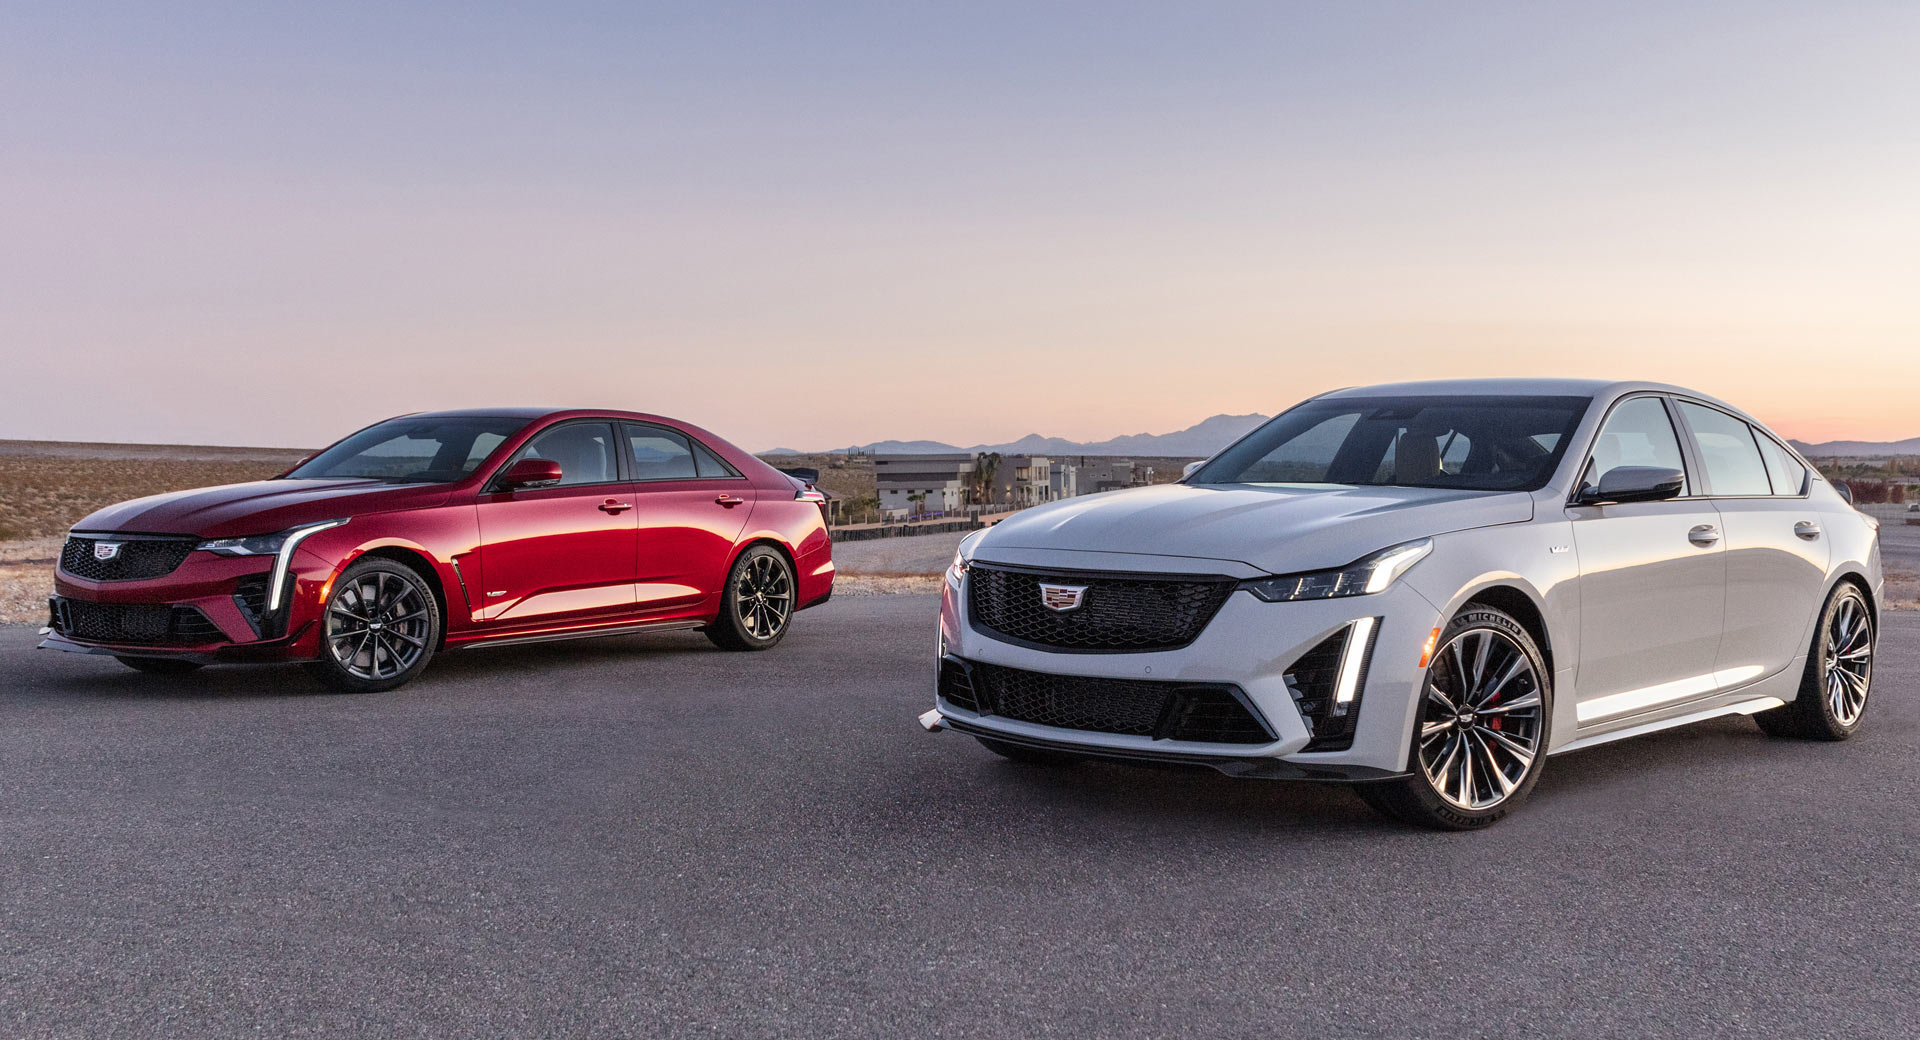 2022 Cadillac CT4-V and CT5-V Blackwings shown before their debut on Monday